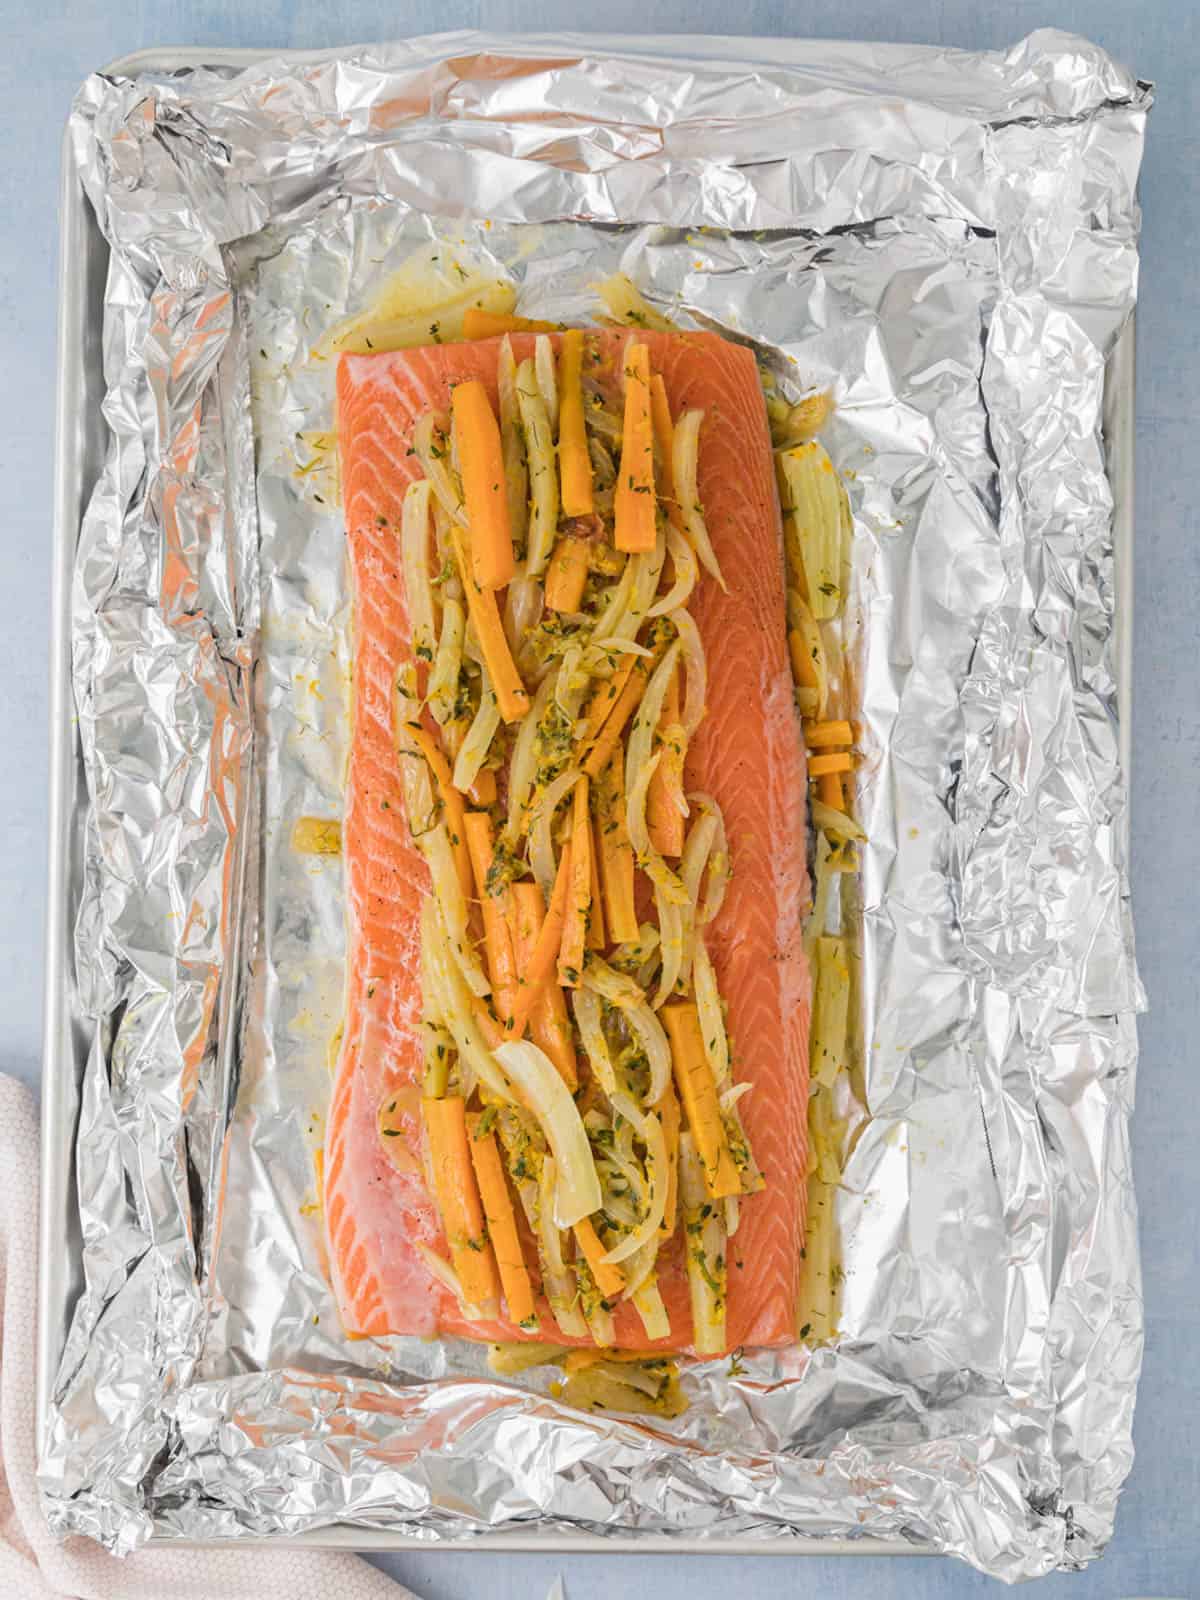 Salmon with fennel on a baking sheet and foil packet.